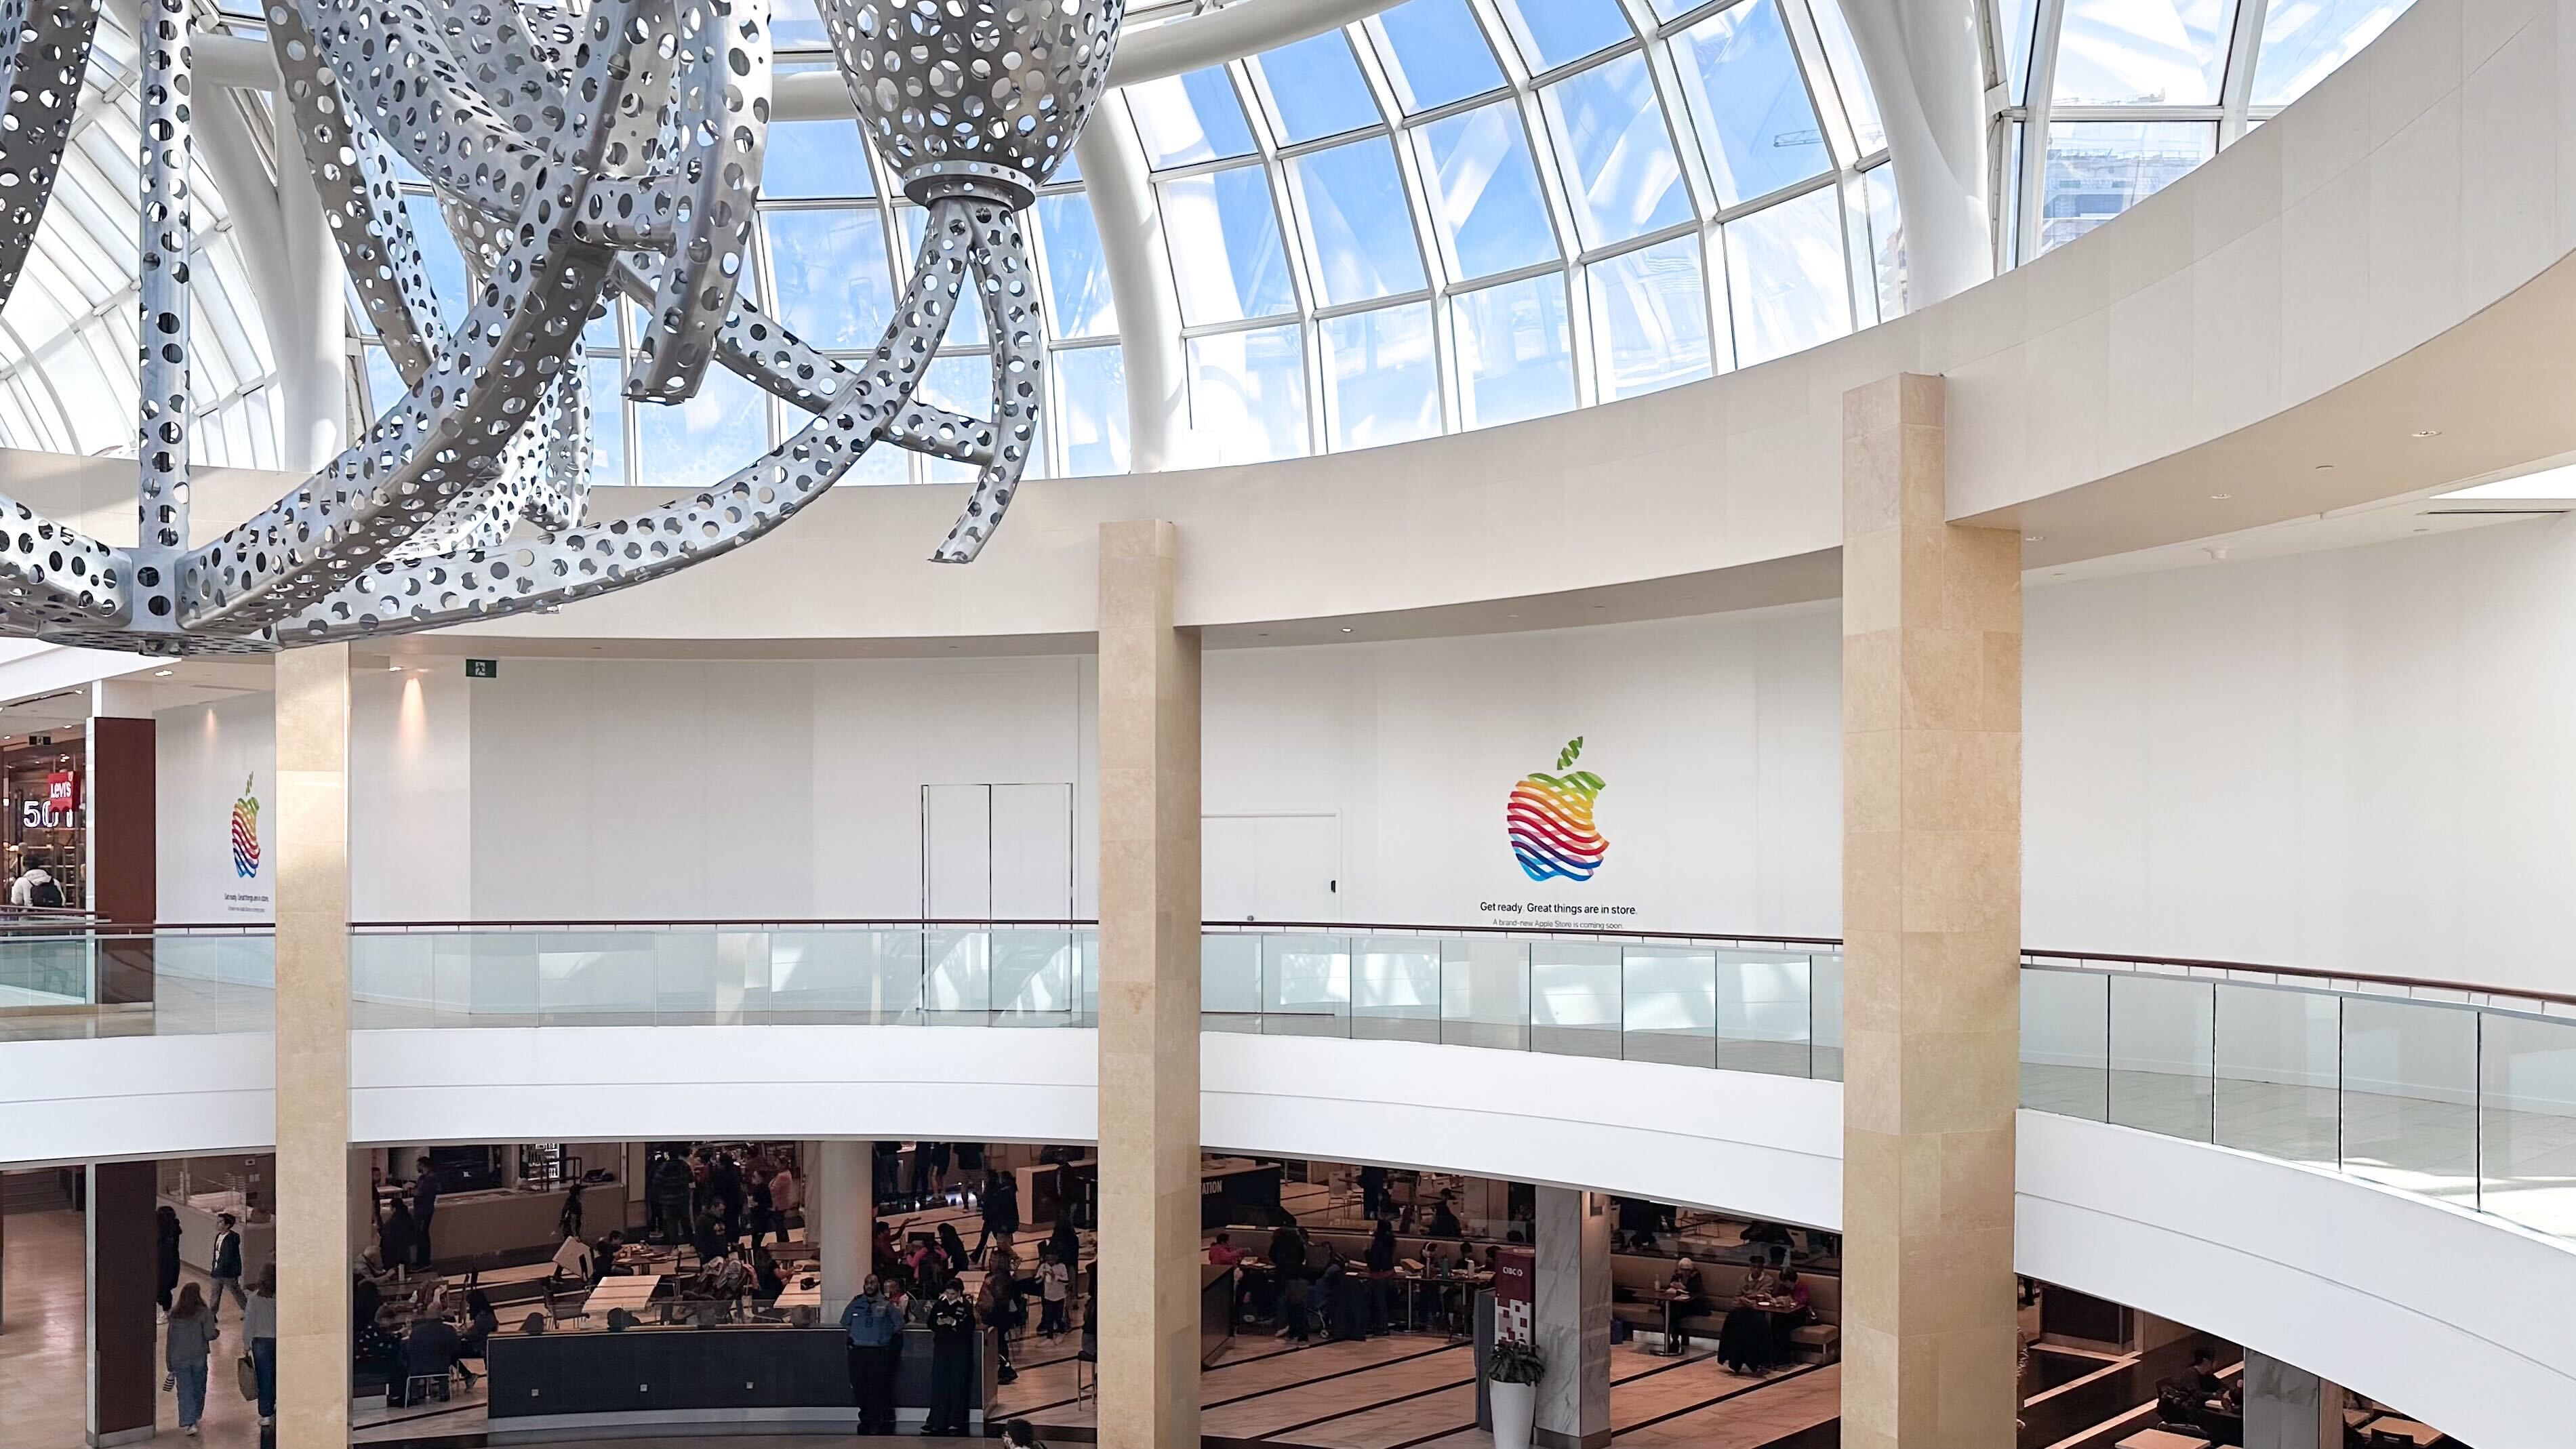 Apple Teases New Store 'Coming Soon' at Square One Mall Near Toronto